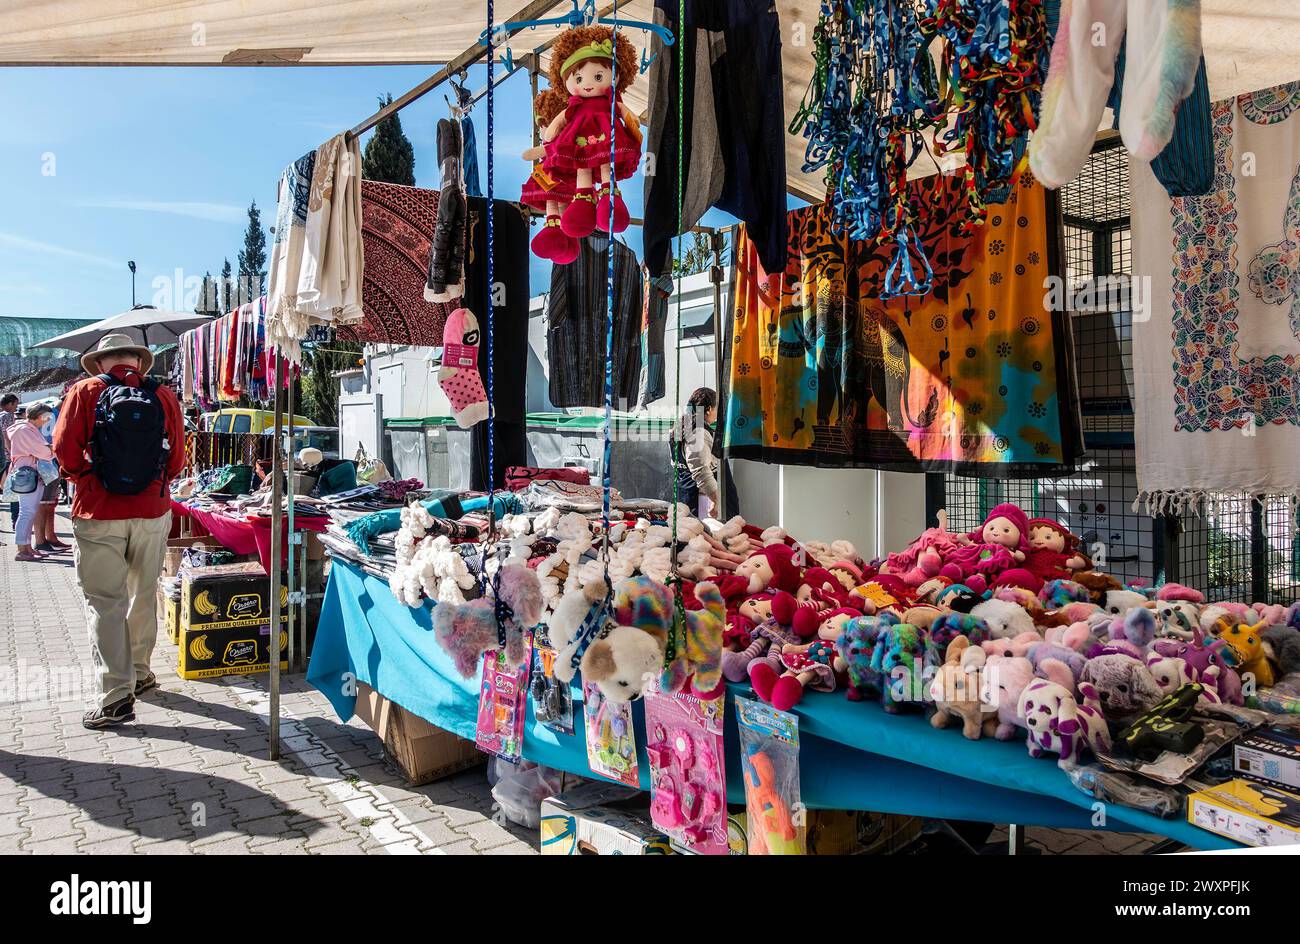 An outdoor market boasts a variety of items for sale, including colorful stuffed animals, dolls, and clothes in Quarteira, Portugal. Stock Photo